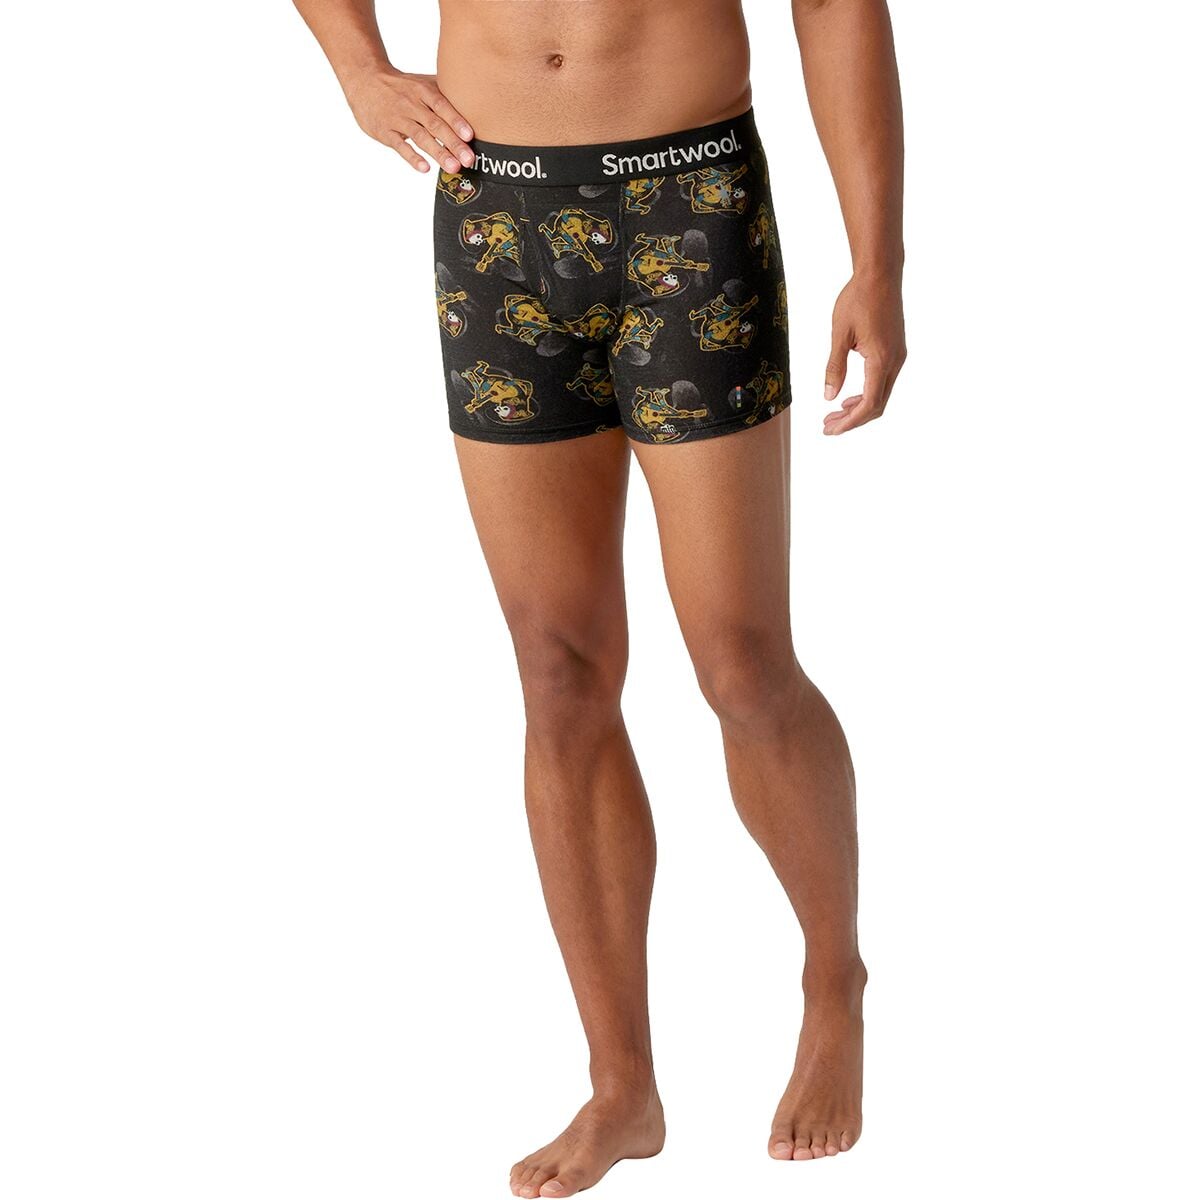 Smartwool Merino (150) Boxer Brief - Mens, FREE SHIPPING in Canada